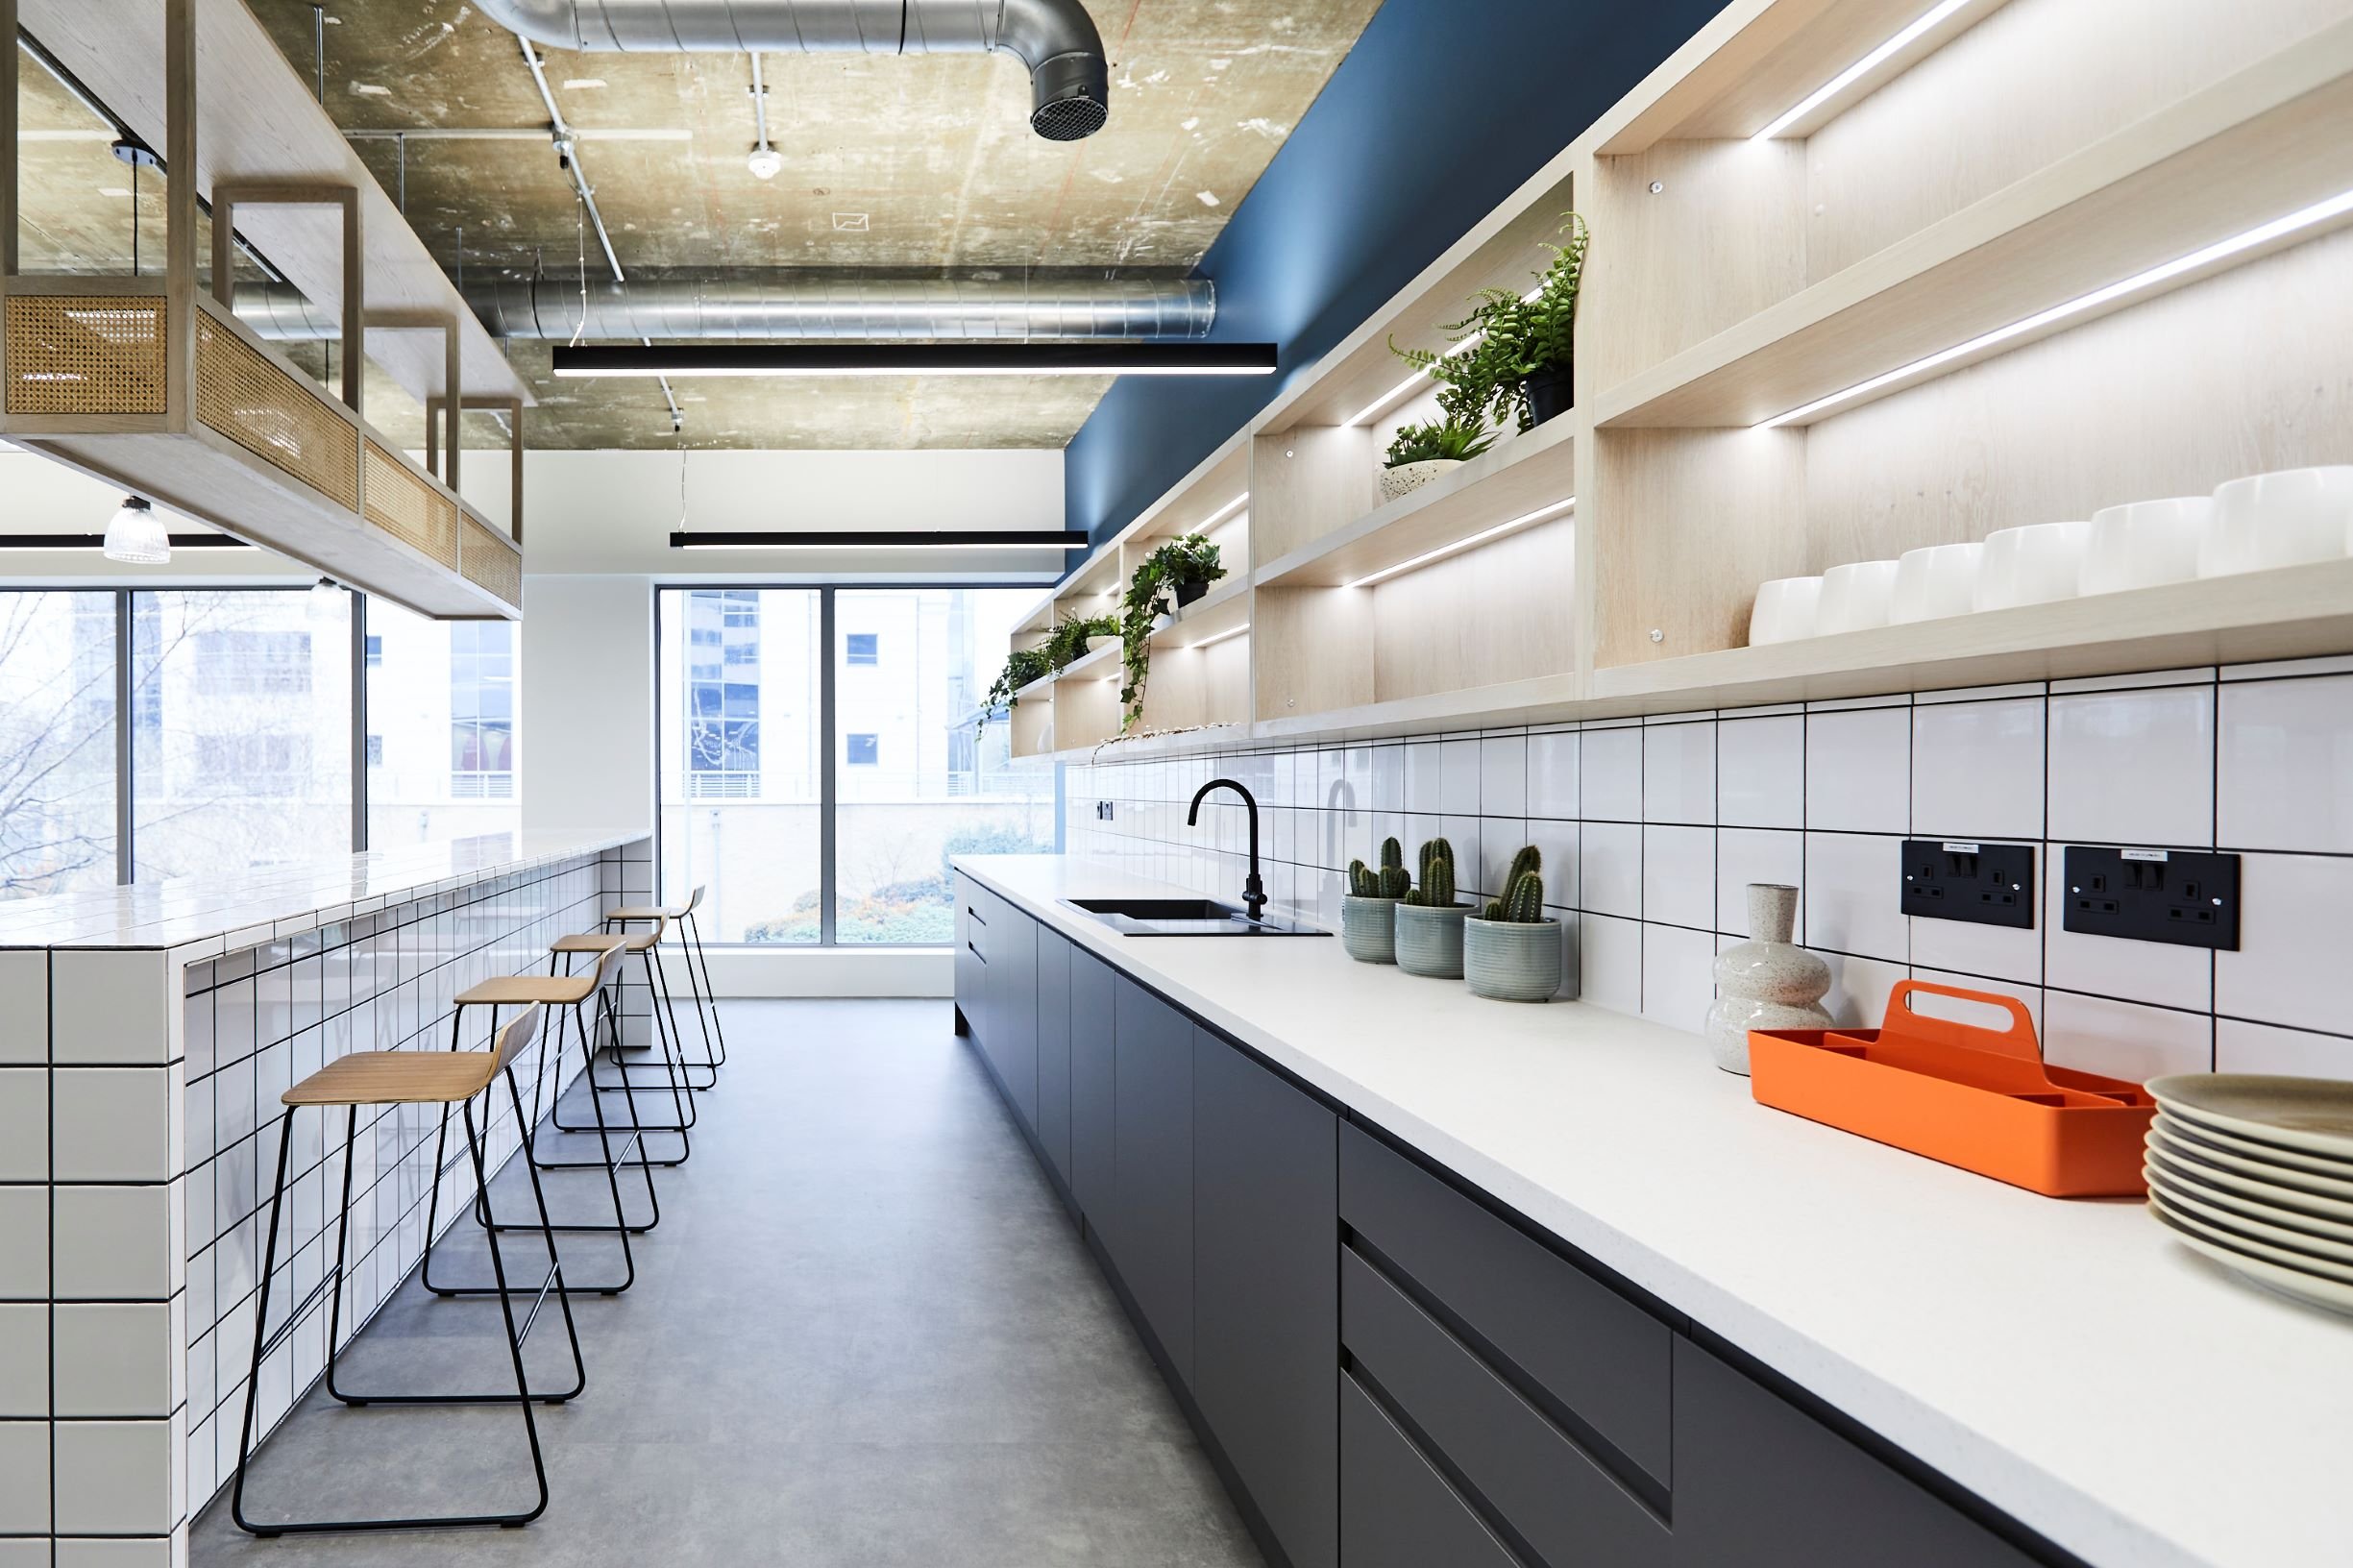 Contemporary lighting design for shared workspaces and kitchens